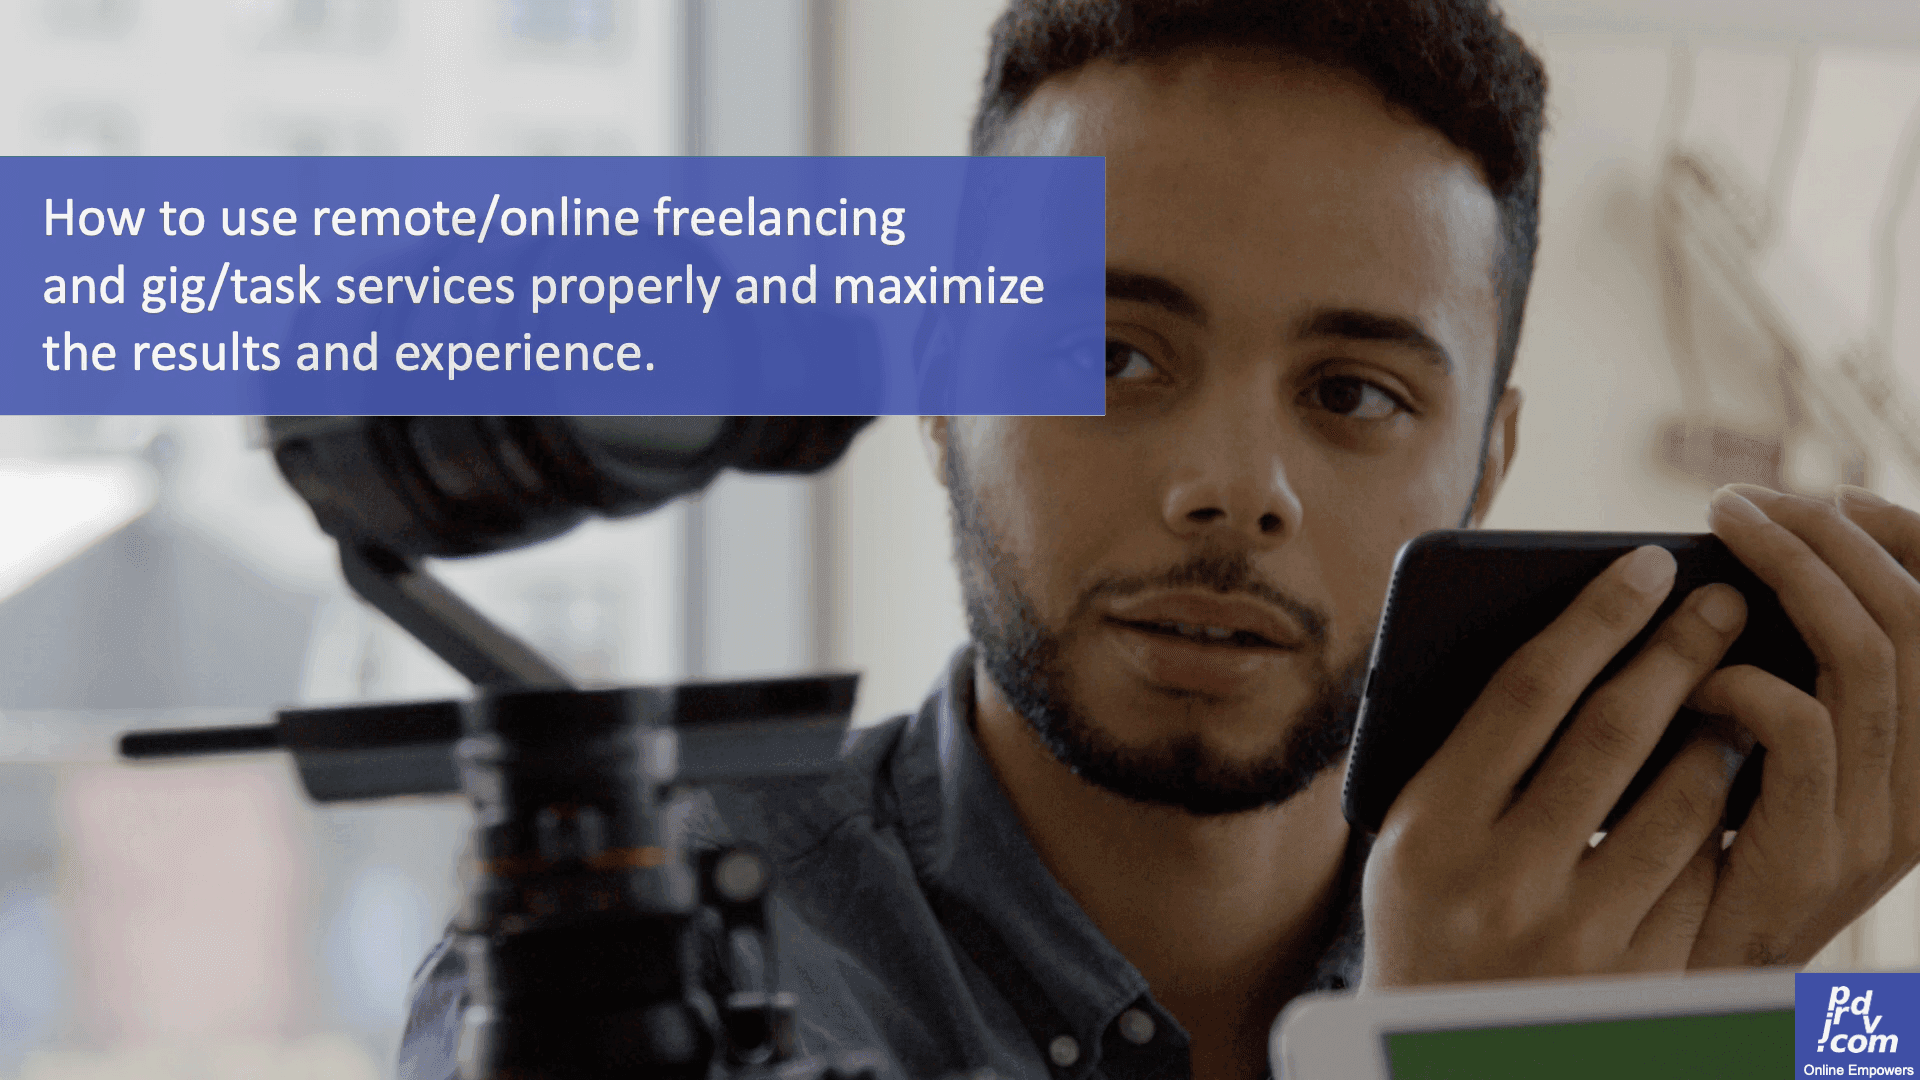 How to use remote/online freelancing and gig/task services properly and maximize the results and experinece